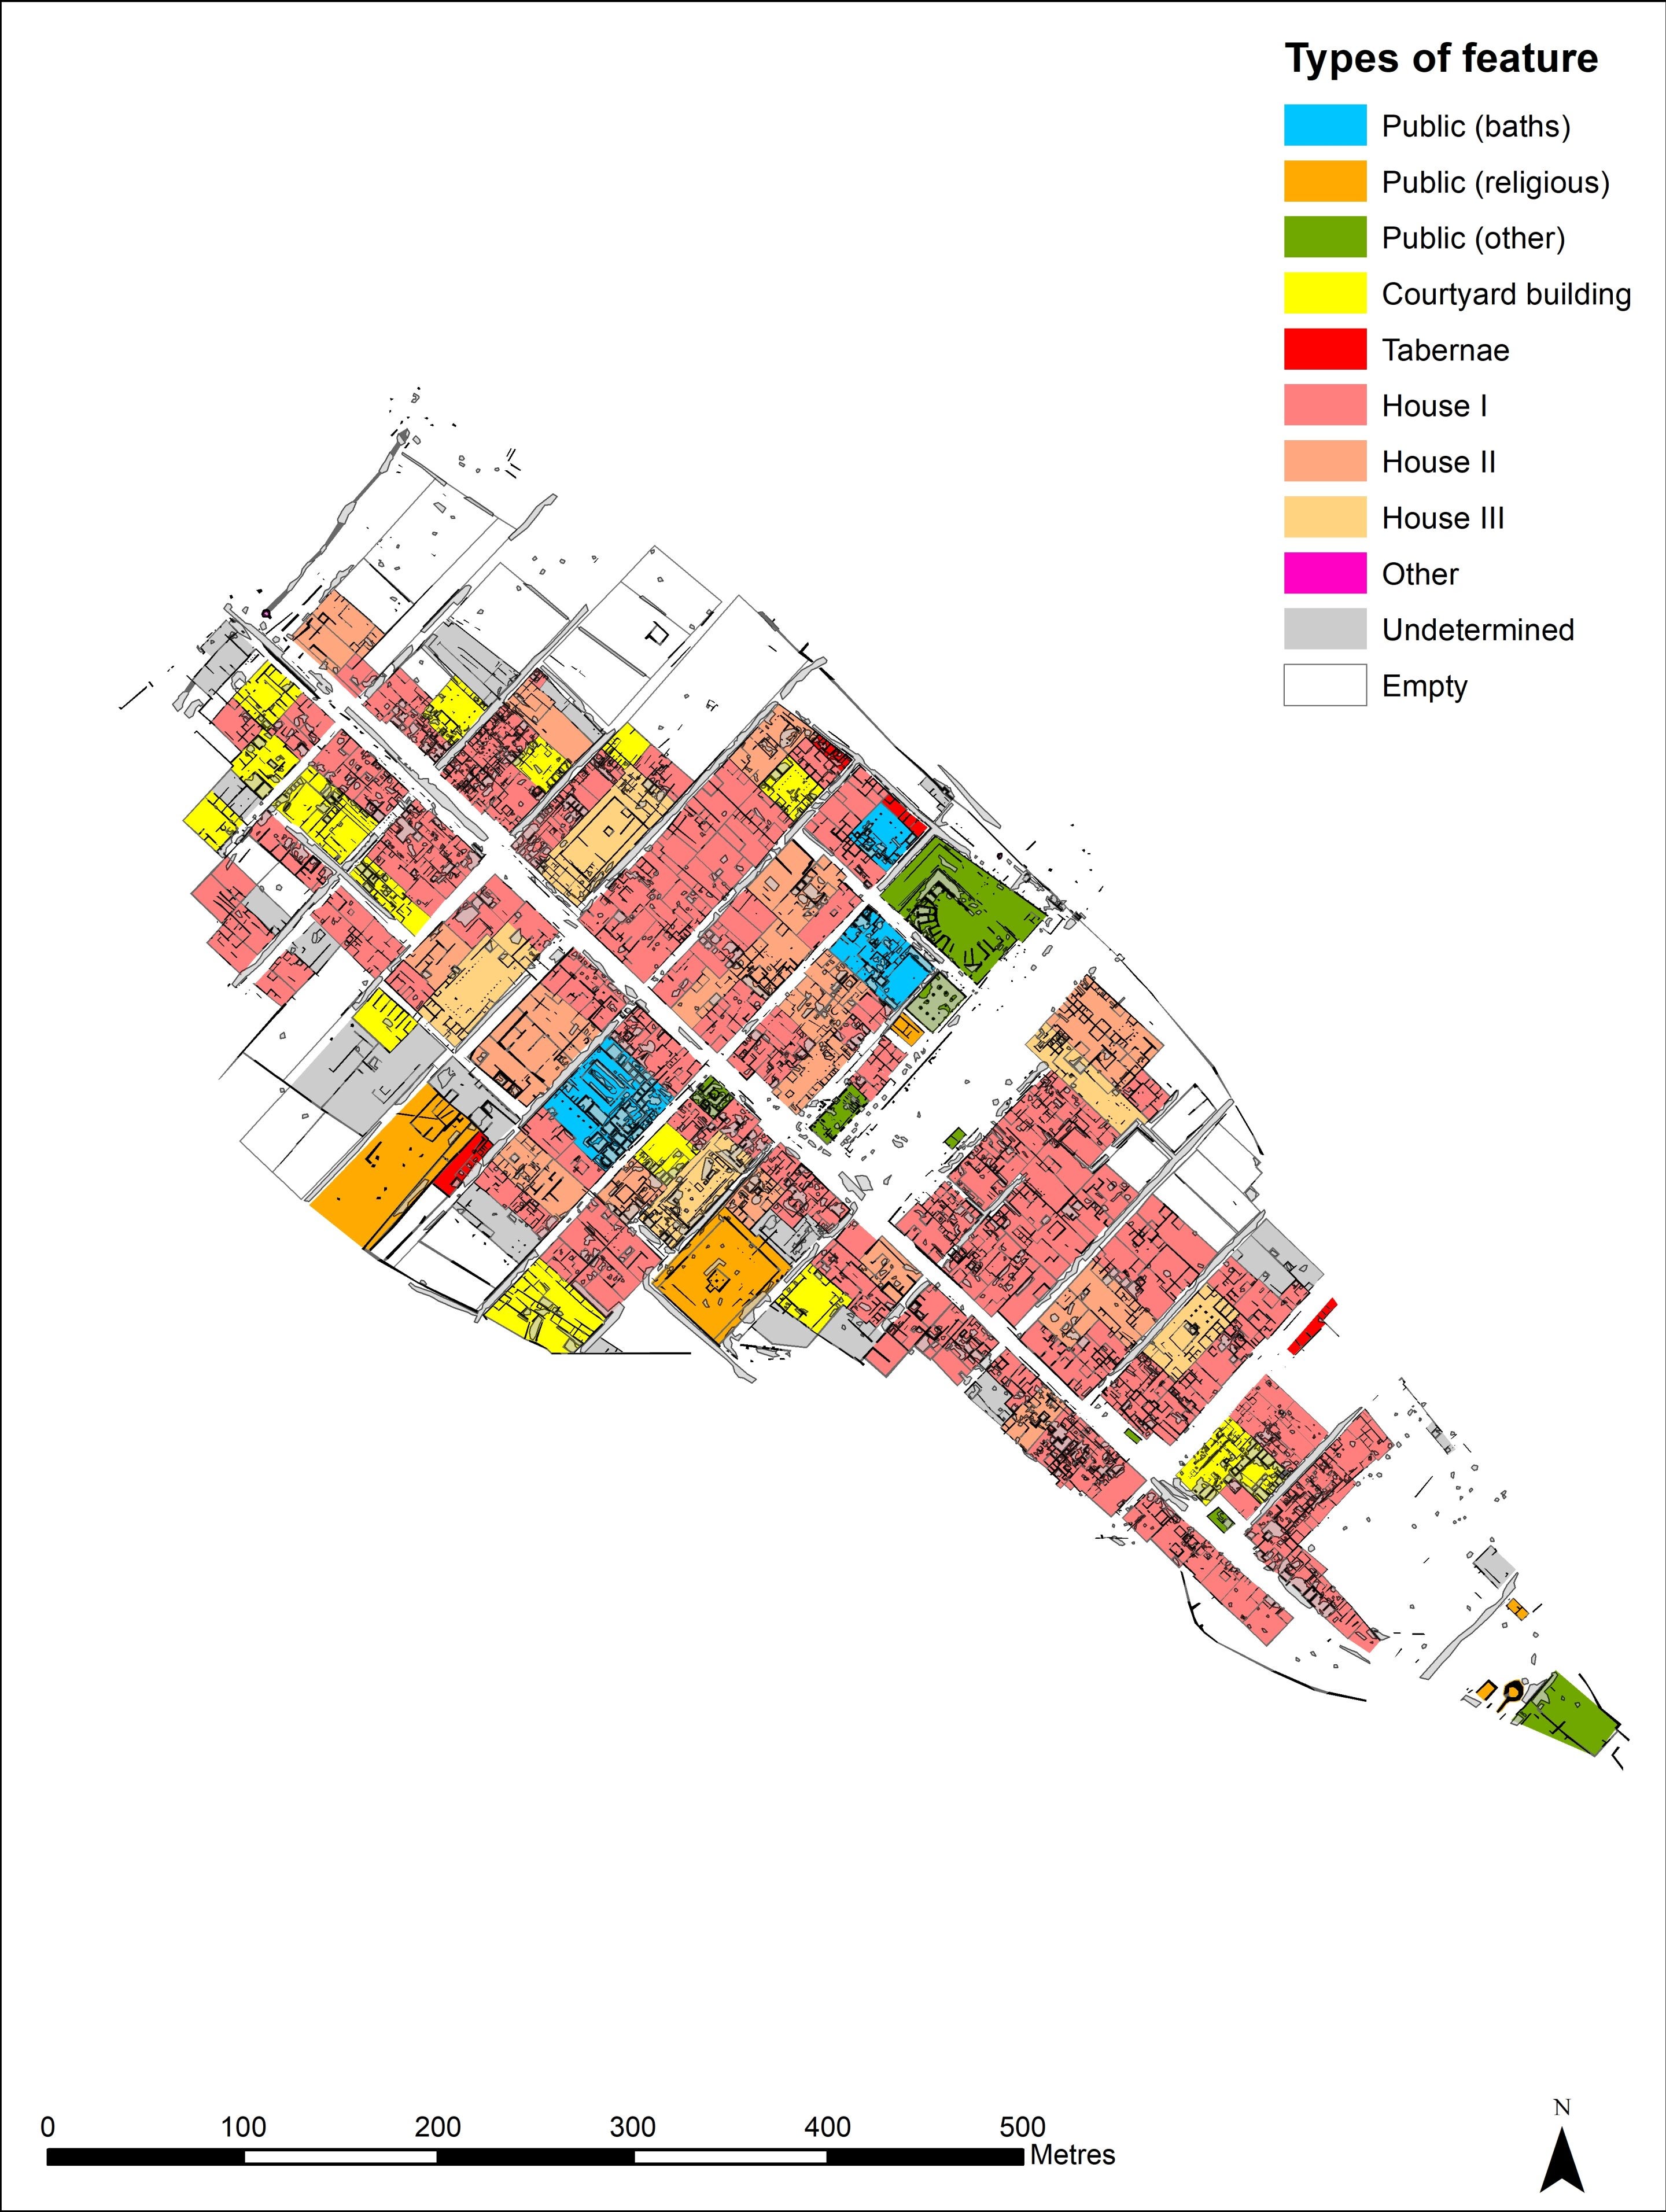 A plan of Interamna Lirenas showing the distribution of different types of buildings